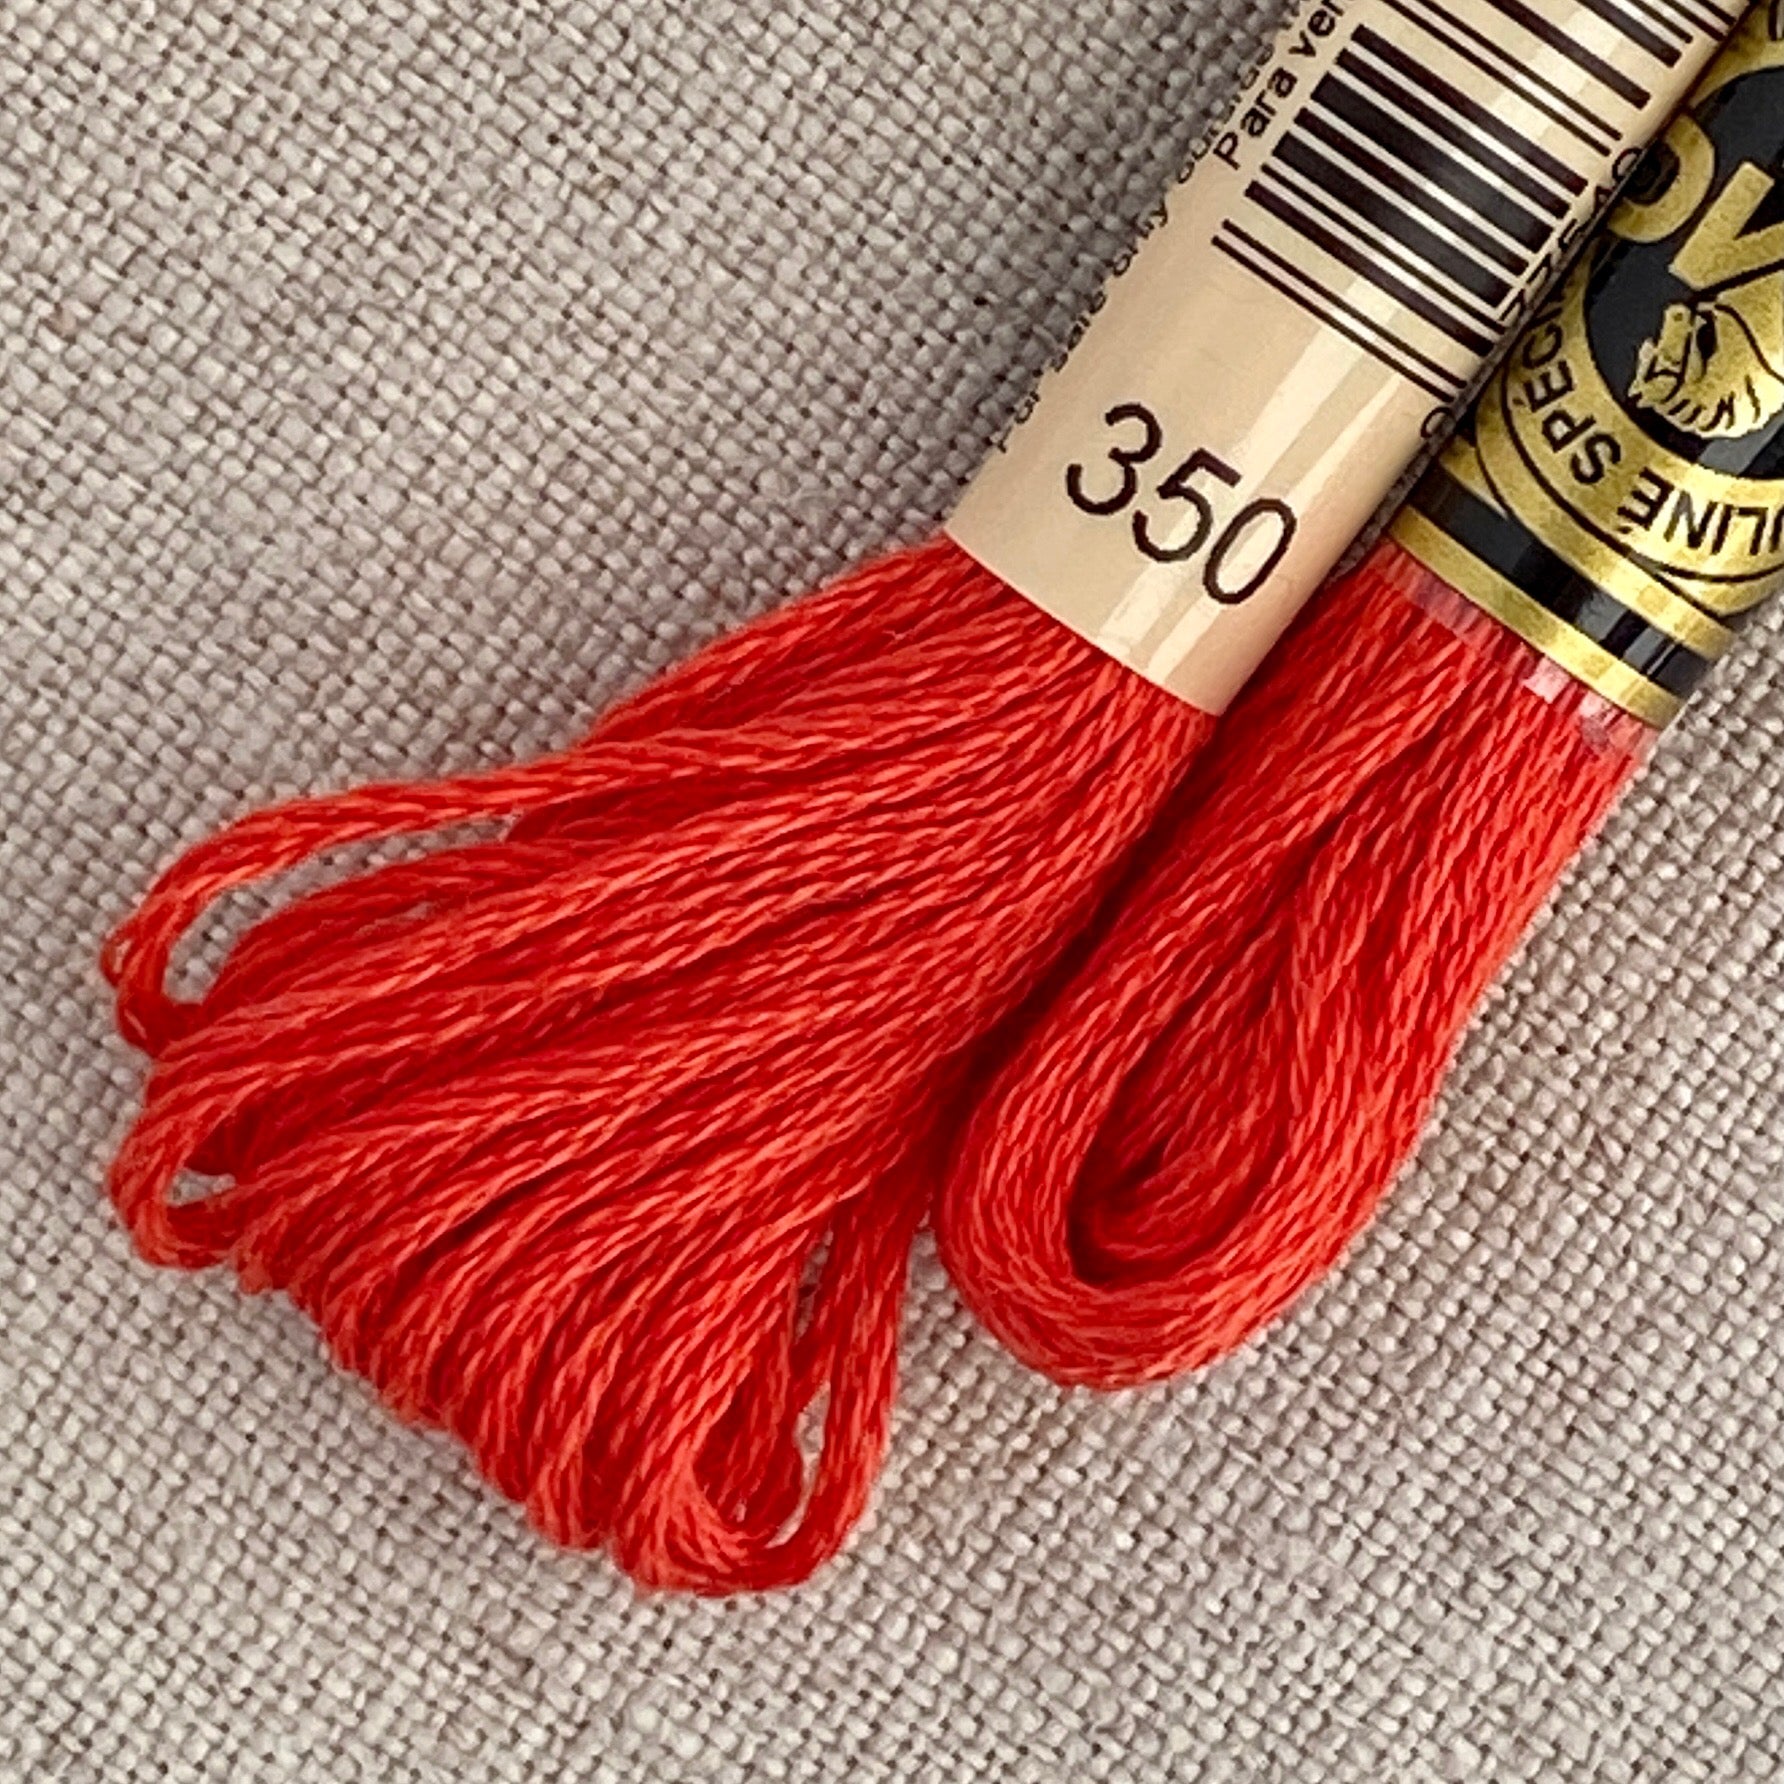 Embroidery Floss DMC Bright Red – Wee Scotty